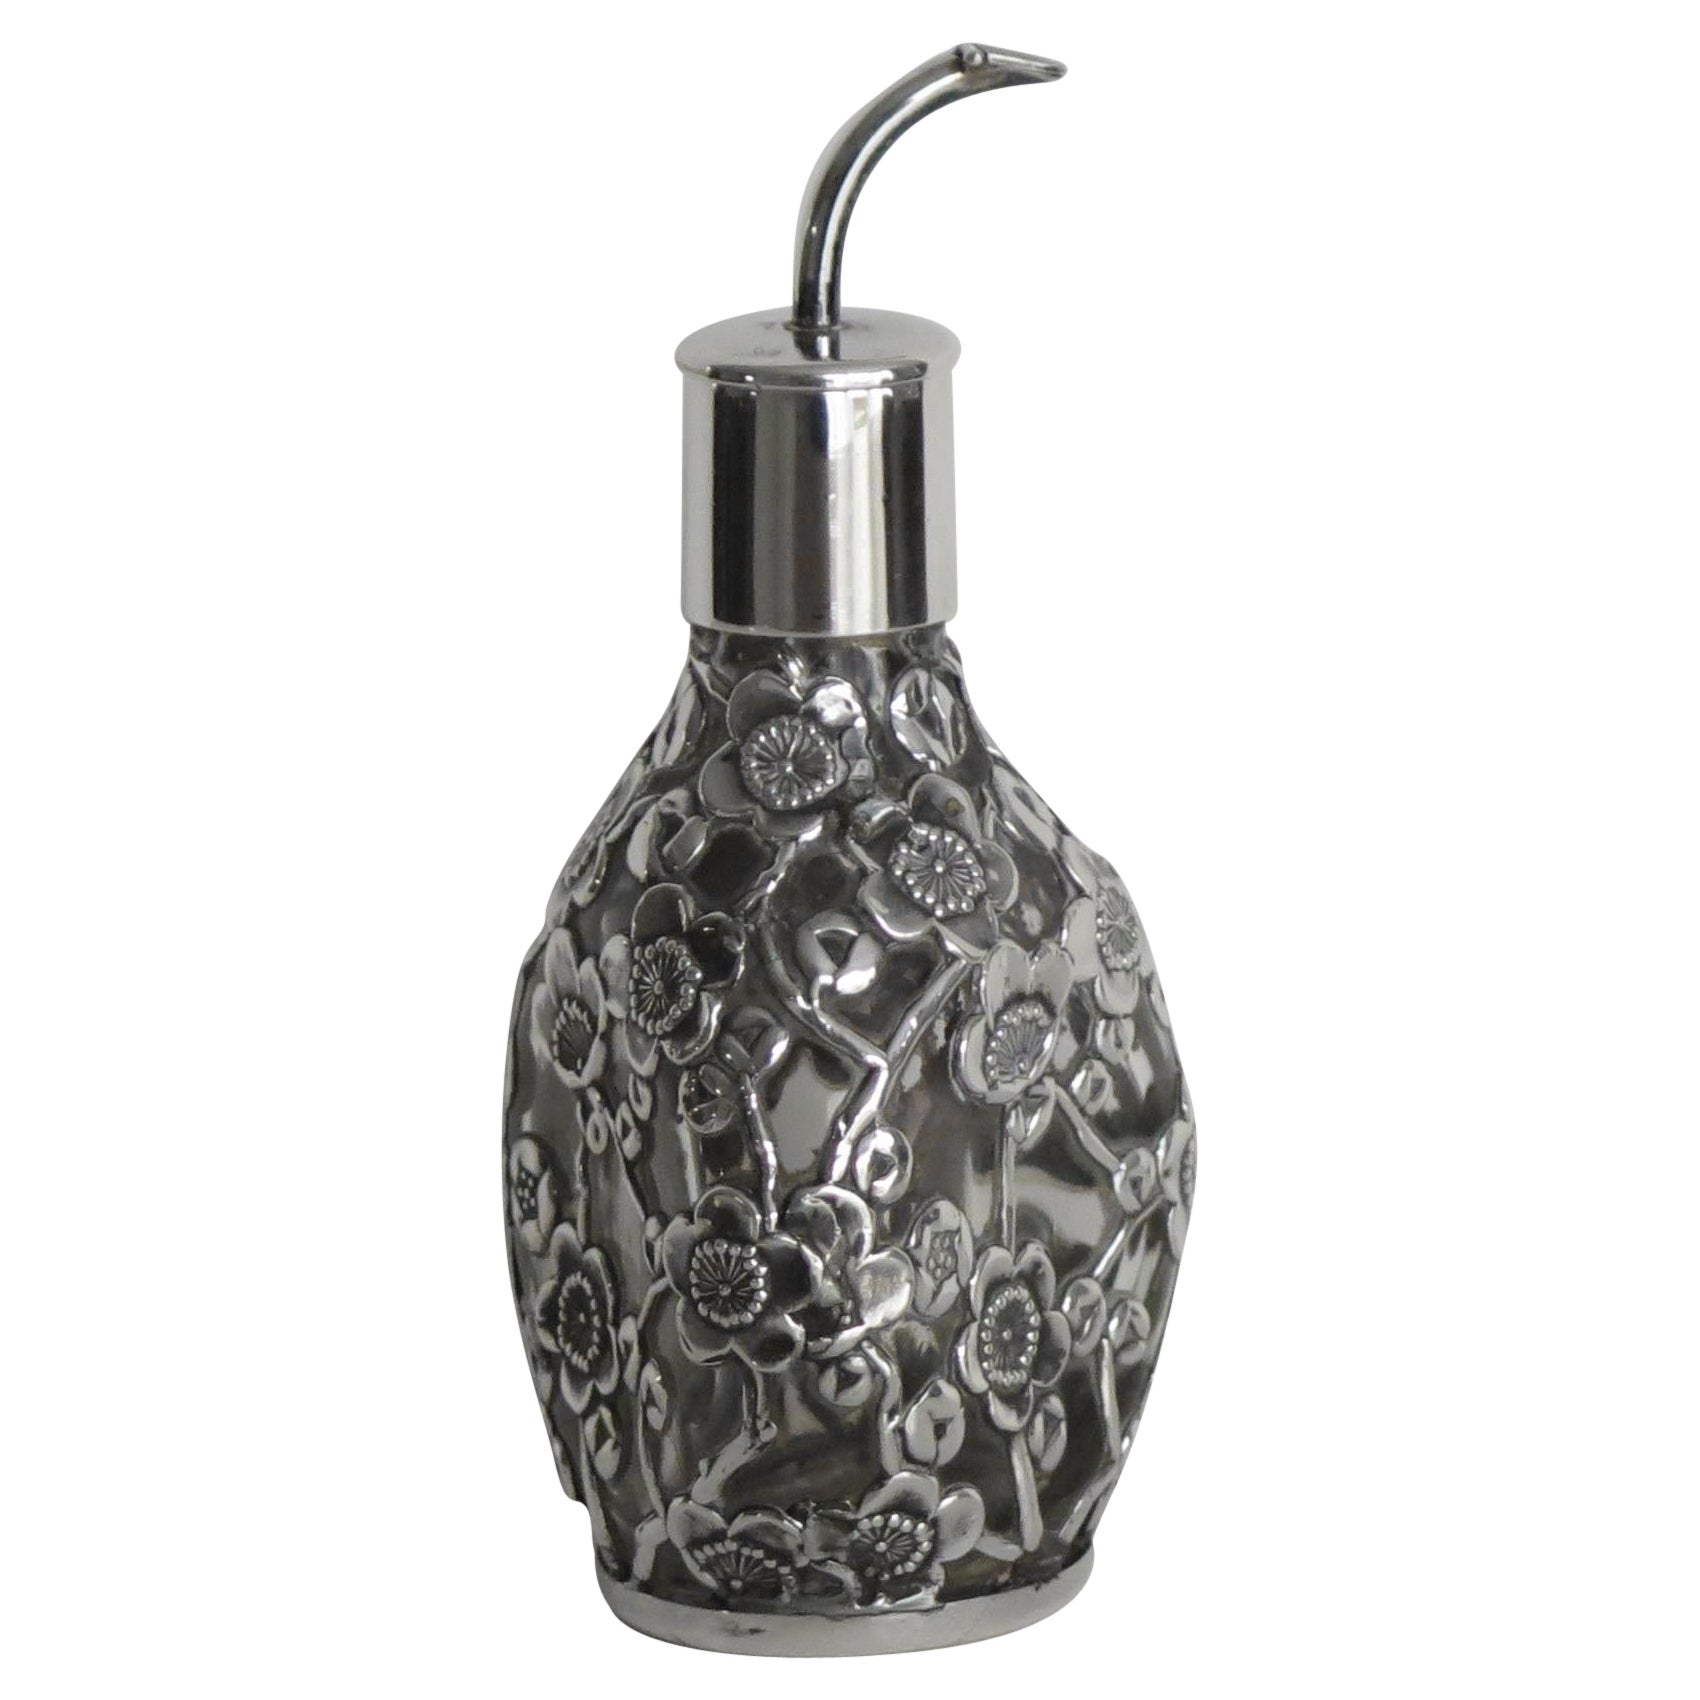 Edwardian Perfume or Scent Bottle Sterling Silver Filigree over Glass, Ca 1900